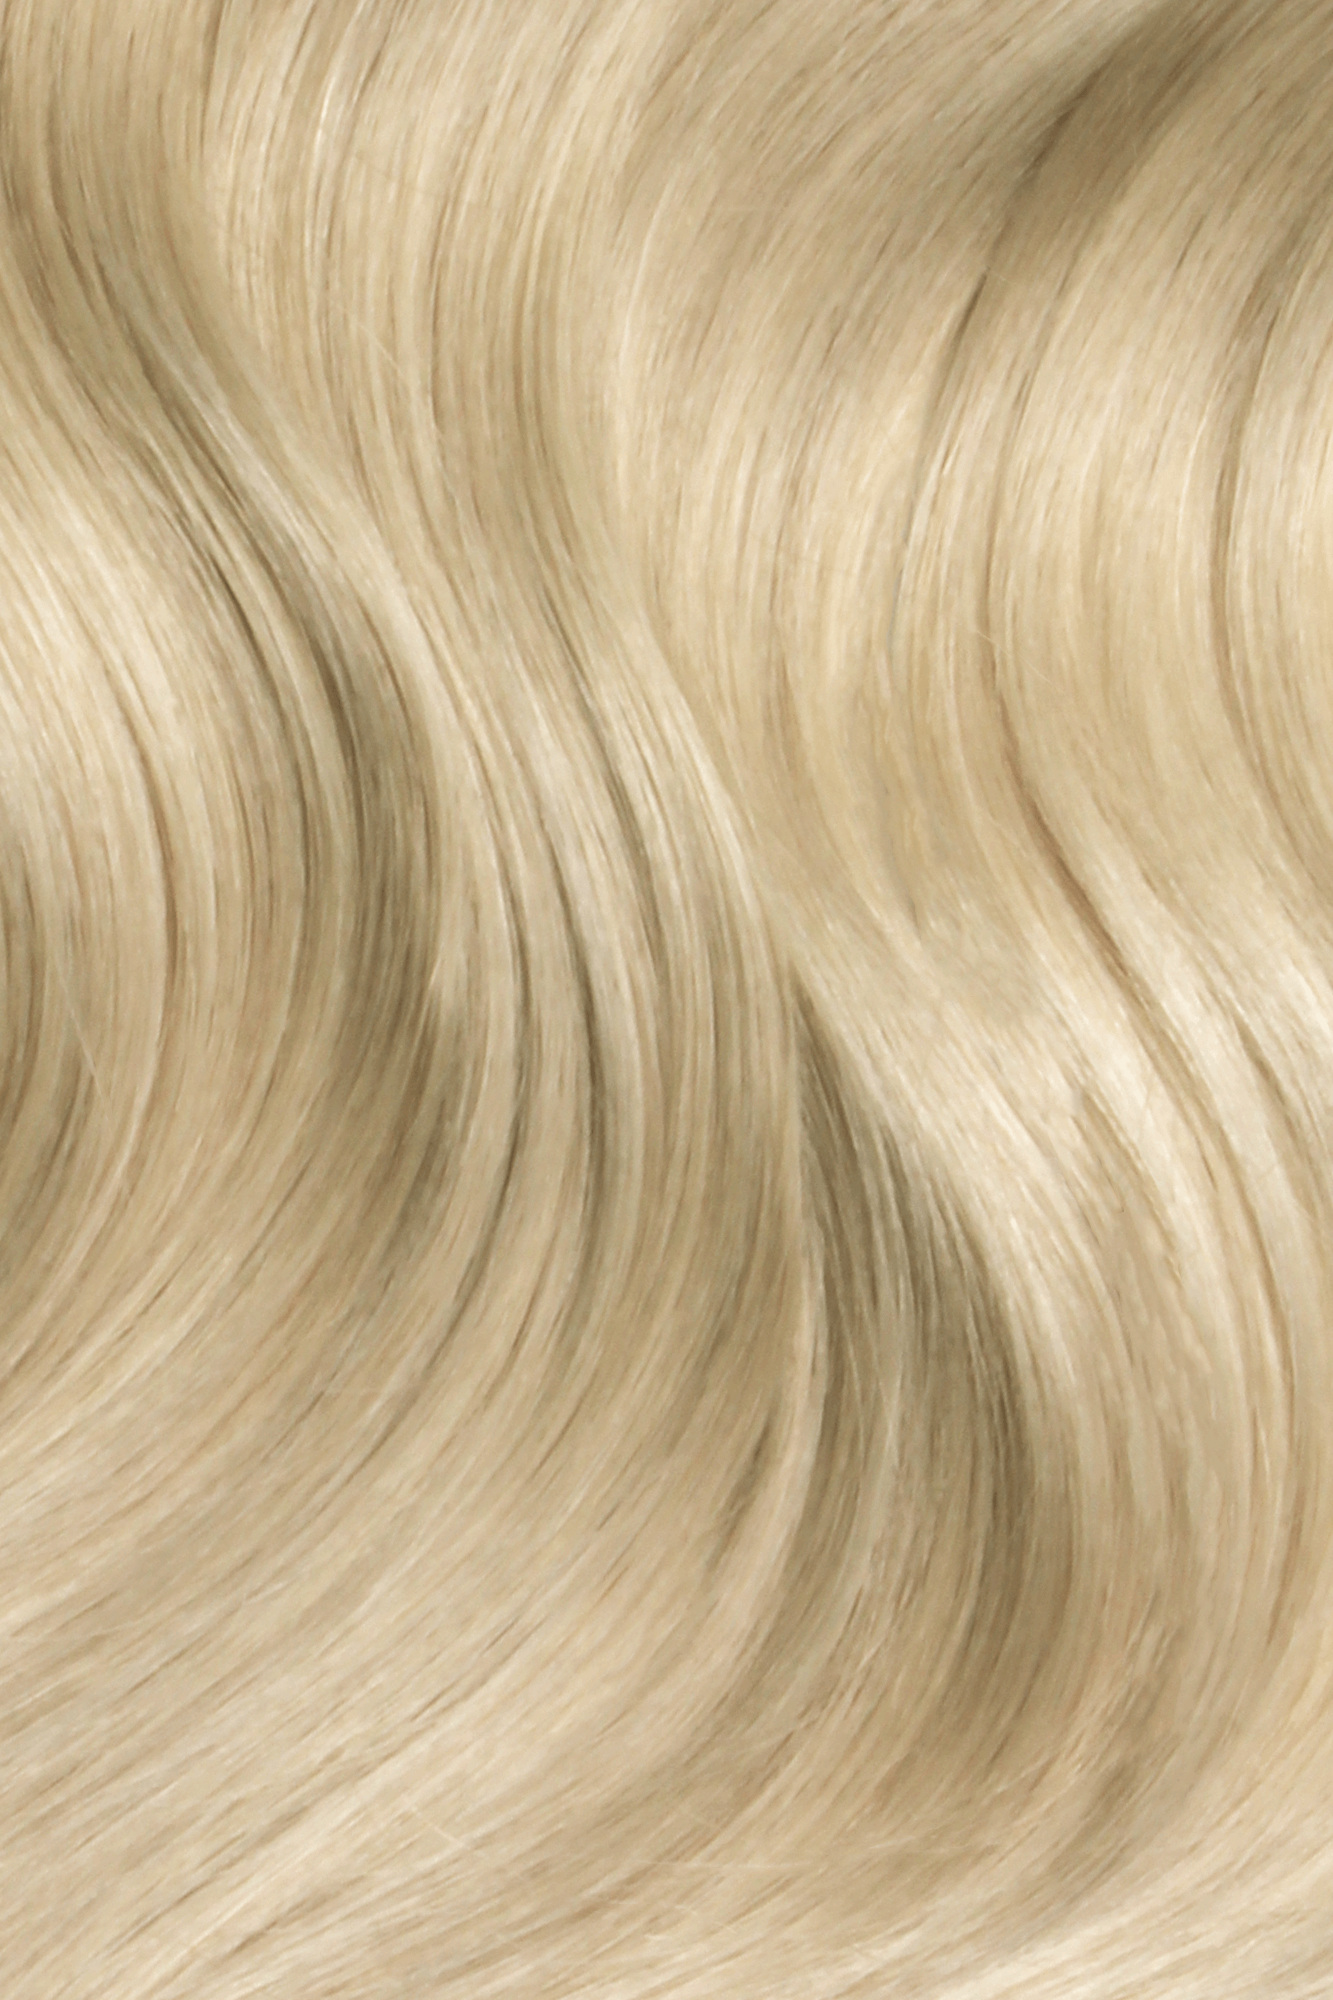 SEAMLESS® Tapes 16 Inches - SWAY Hair Extensions Hollywood-Ash-Blonde-18A-613A clip-in hair extensions made of 100% Double Drawn, Remy Human Hair. SWAY SEAMLESS® Tapes, 16 inches. Lightweight, flexible, and perfect for any hairstyle.